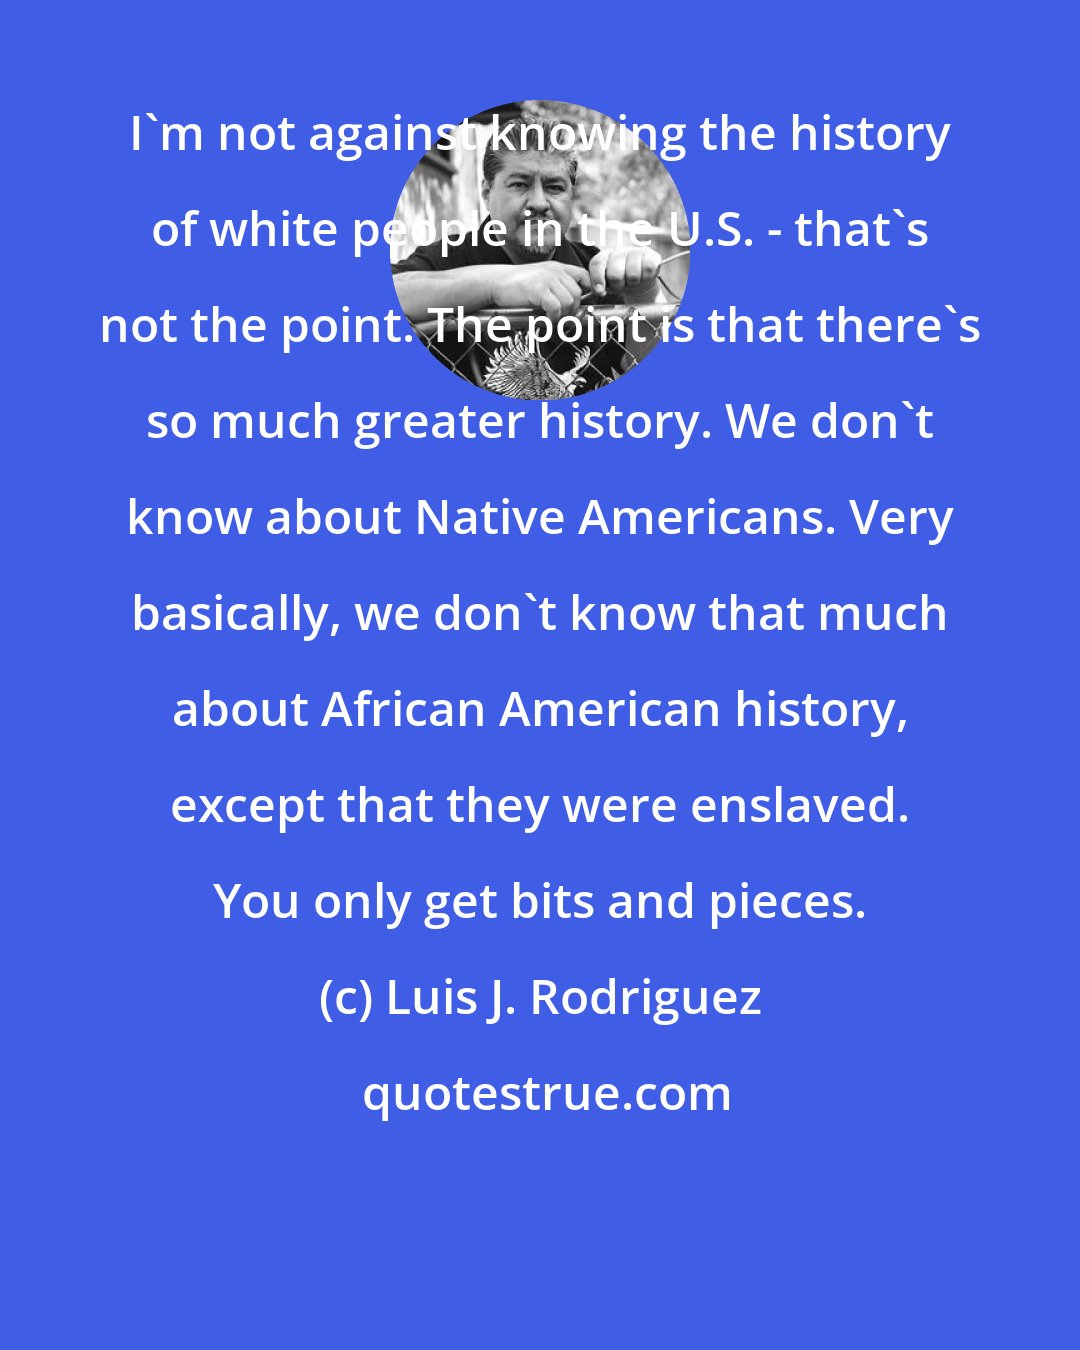 Luis J. Rodriguez: I'm not against knowing the history of white people in the U.S. - that's not the point. The point is that there's so much greater history. We don't know about Native Americans. Very basically, we don't know that much about African American history, except that they were enslaved. You only get bits and pieces.